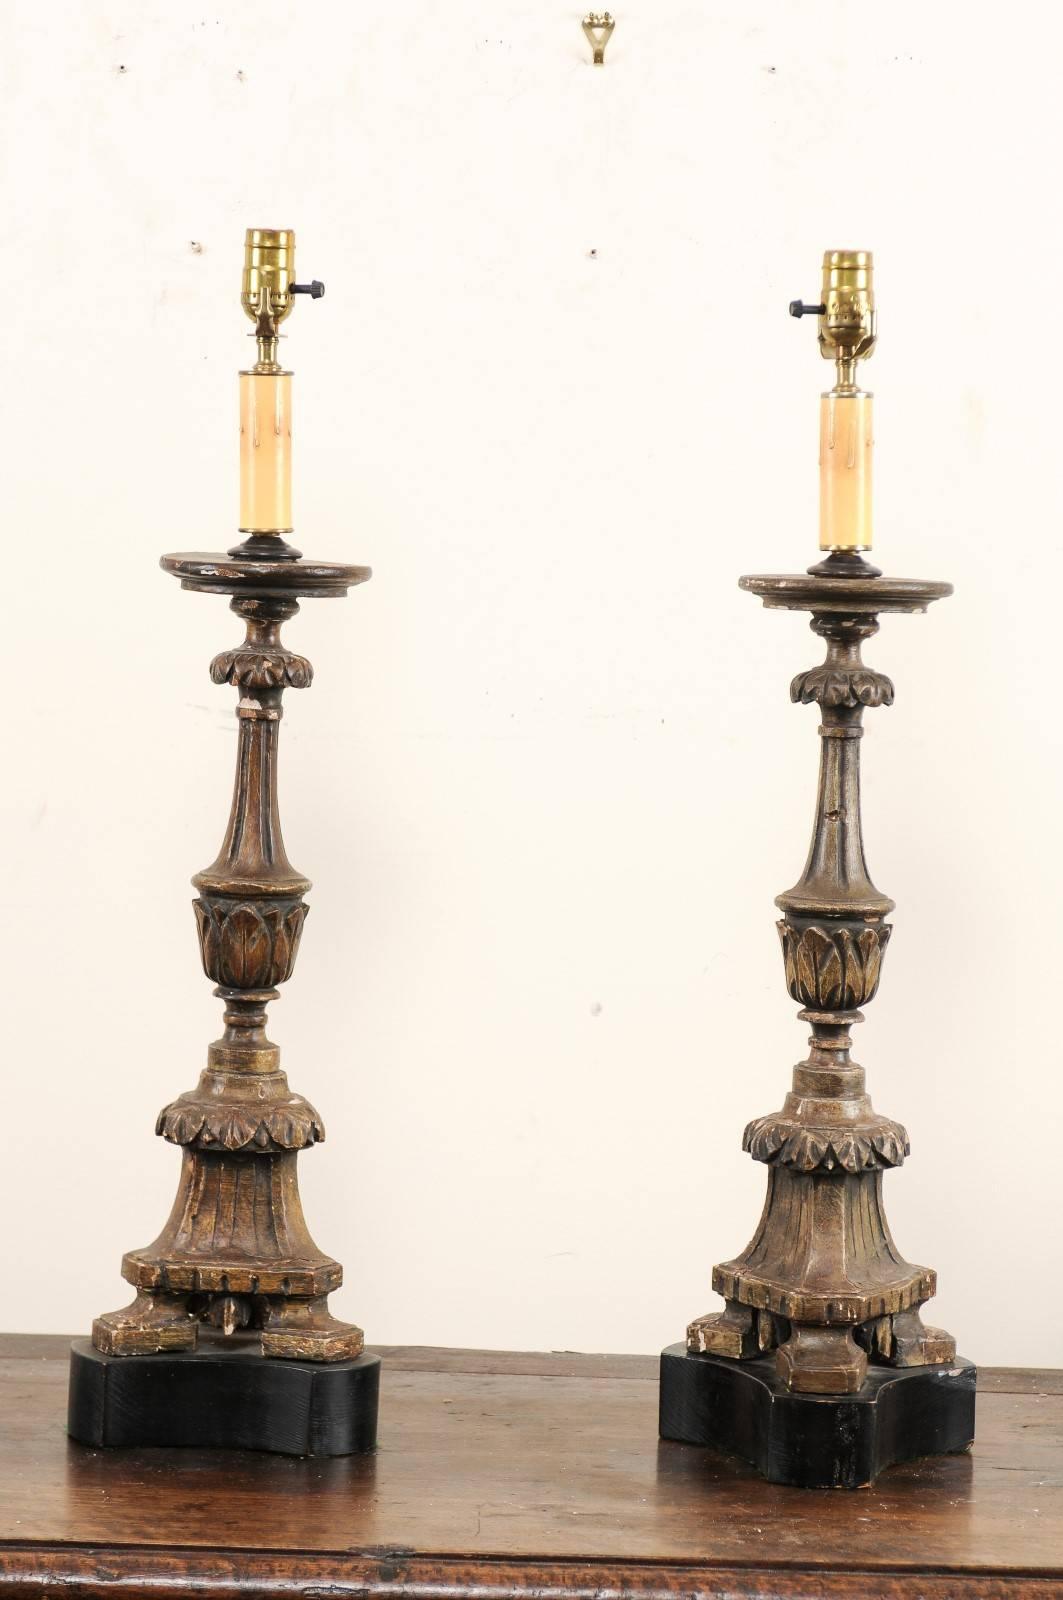 A pair of Italian 19th century carved wood altar sticks made into table lamps. This pair of Italian table lamps have been fashioned from antique carved wood altar sticks. The altar sticks have nice fluted details with a decorative leaf motif and